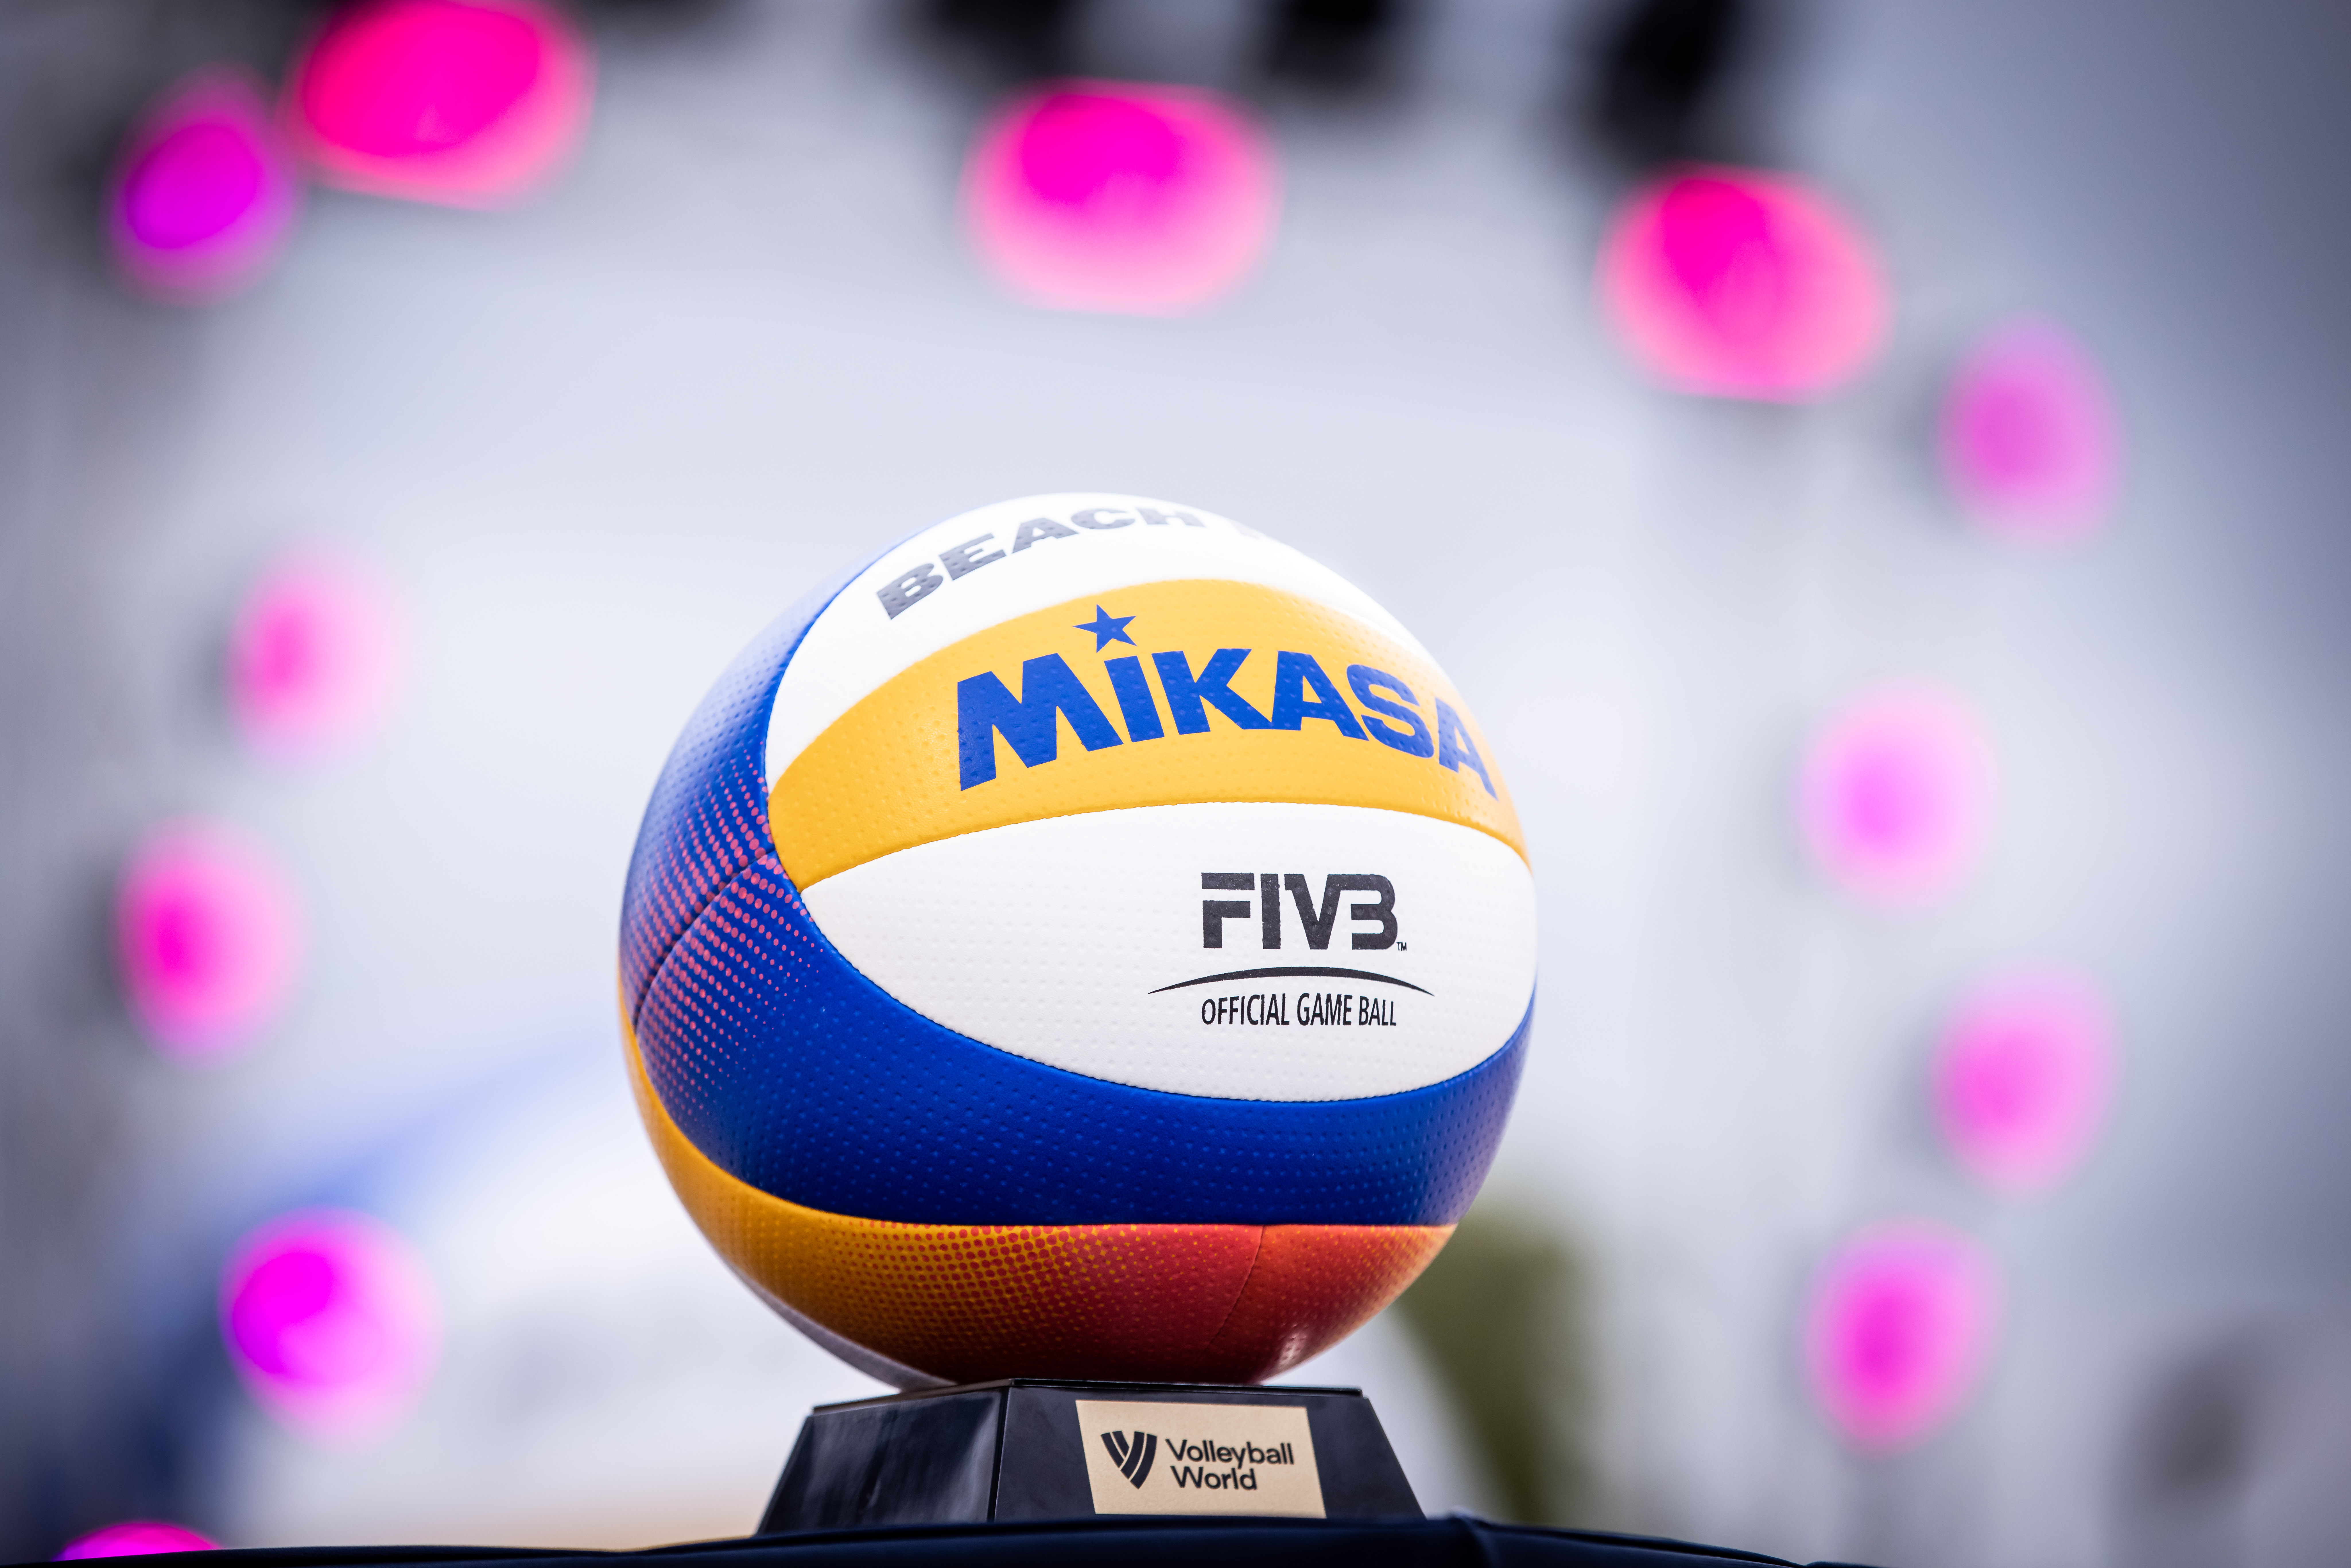 Beach Pro Tour welcomes 'best ever' new MIKASA ball